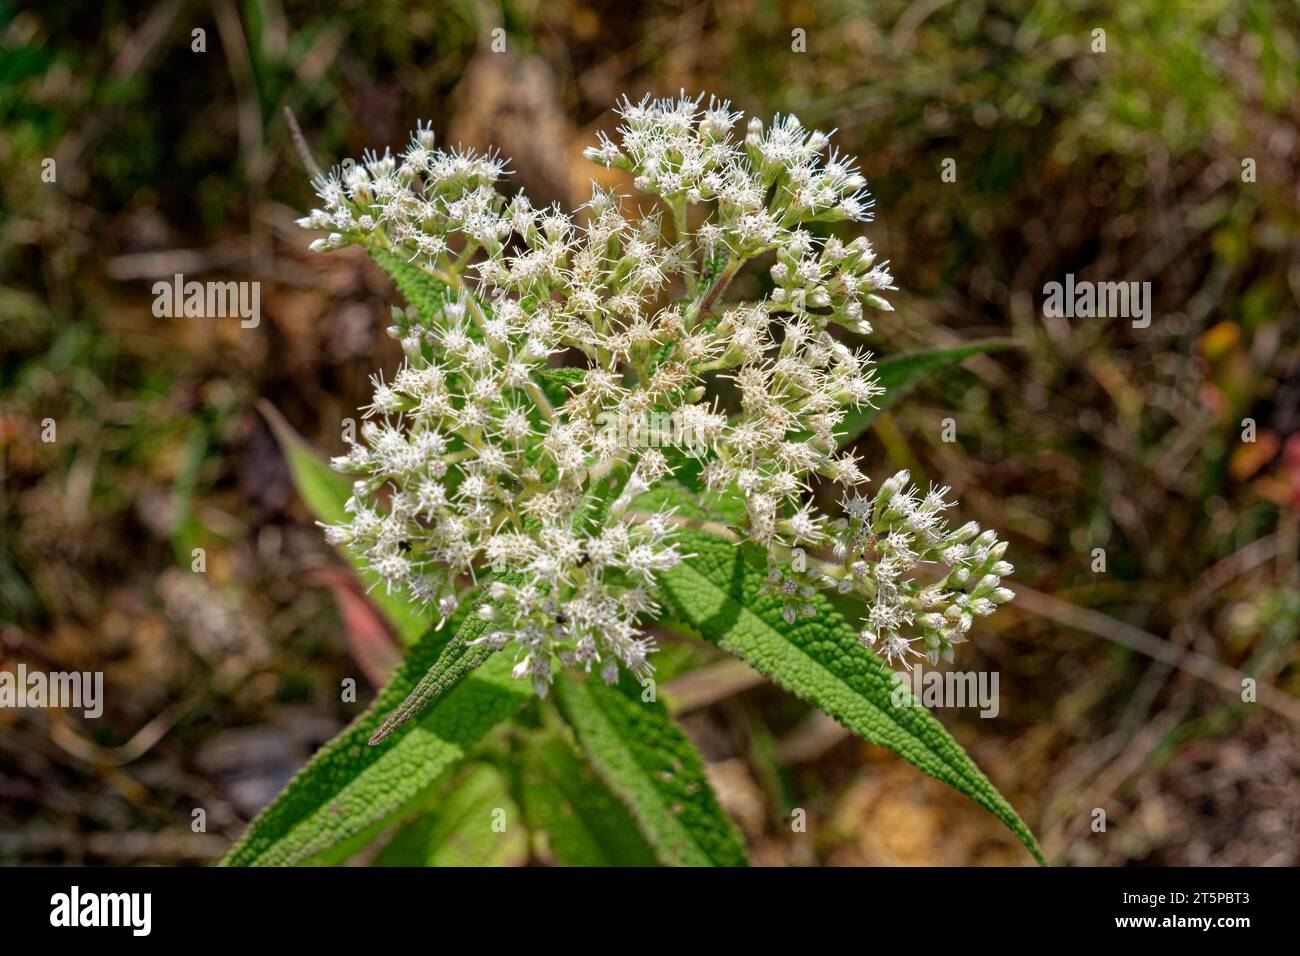 Clusters of frilly white flowers in bloom with little seeds in the center on a wildflower plant commonly called a American boneset has many names its Stock Photo